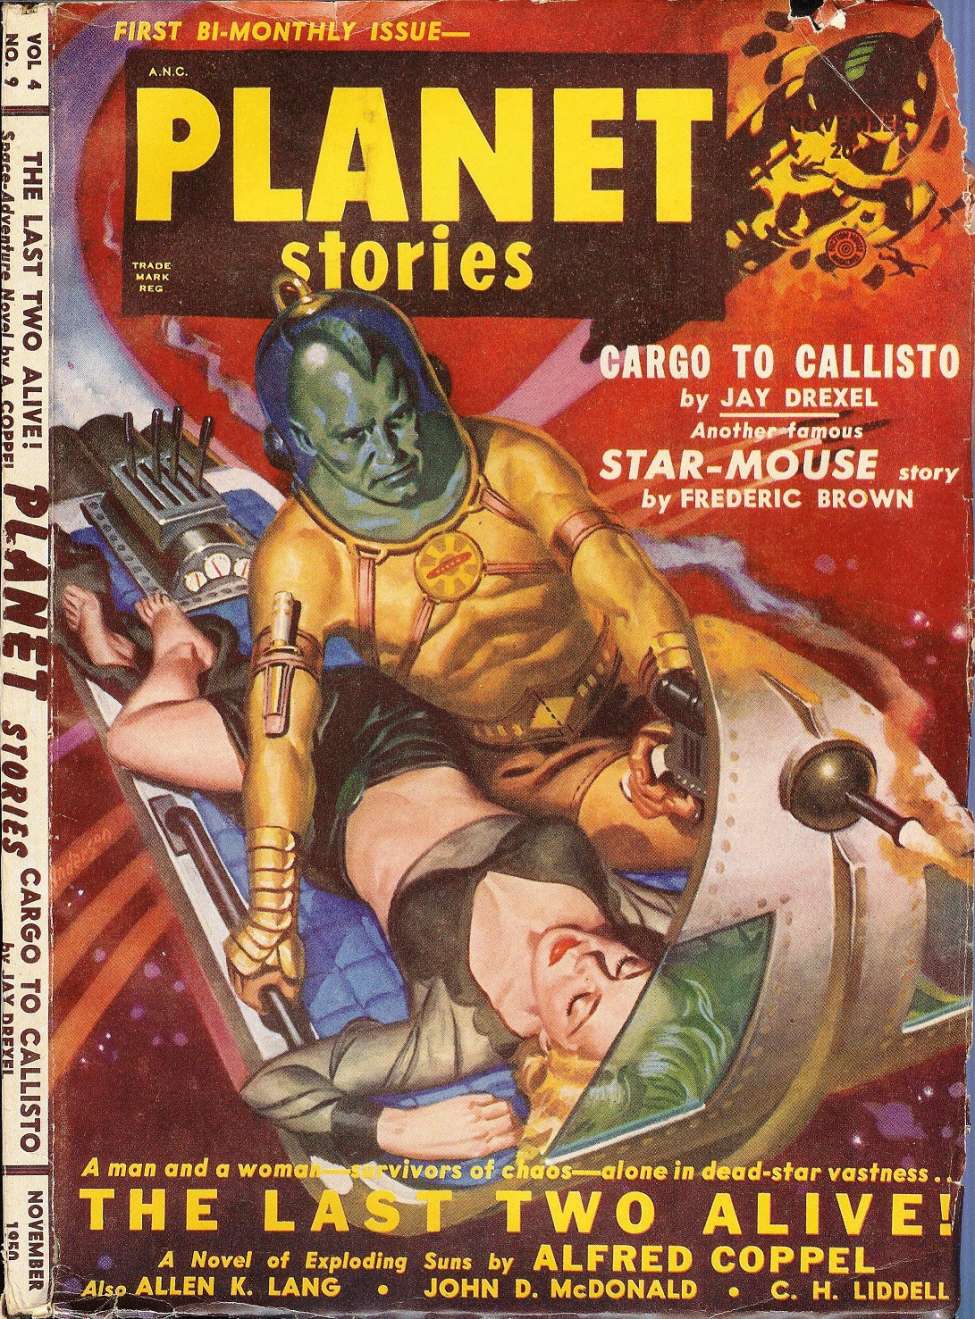 Book Cover For Planet Stories v4 9 - The Last Two Alive! - Alfred Coppel, Jr.